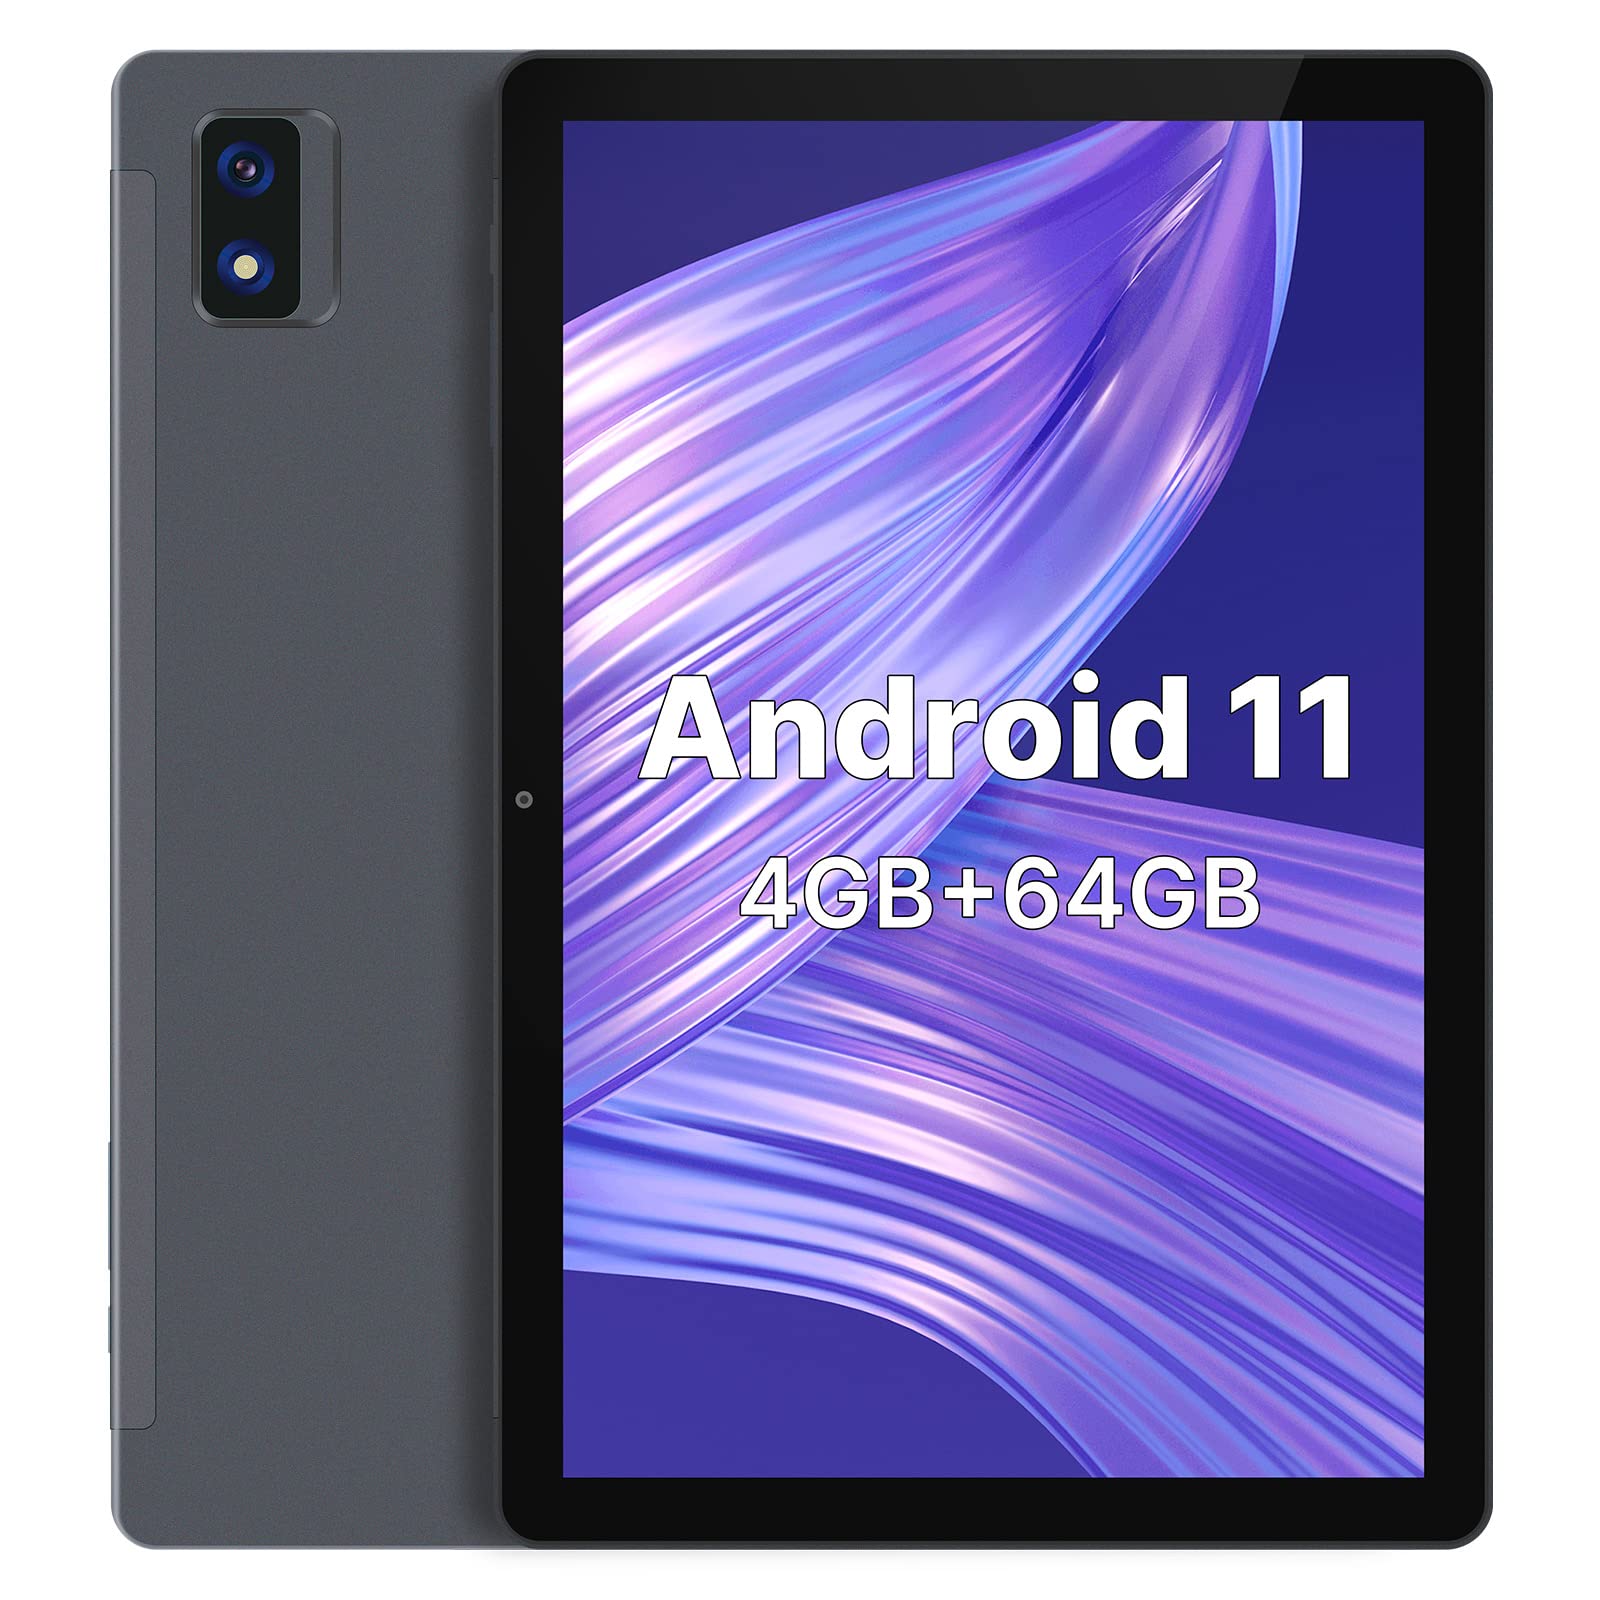 ApoloSign 10 Inch Andorid 11 Tablet 5GHz WiFi 4G LTE Tablet with Sim Card Slot Octa-core 4GB RAM 64GB ROM 1920x1200 FHD IPS Screen 5+13MP Camera, WiFi,Bluetooth, GPS, 6000mAh Batterry (T30)